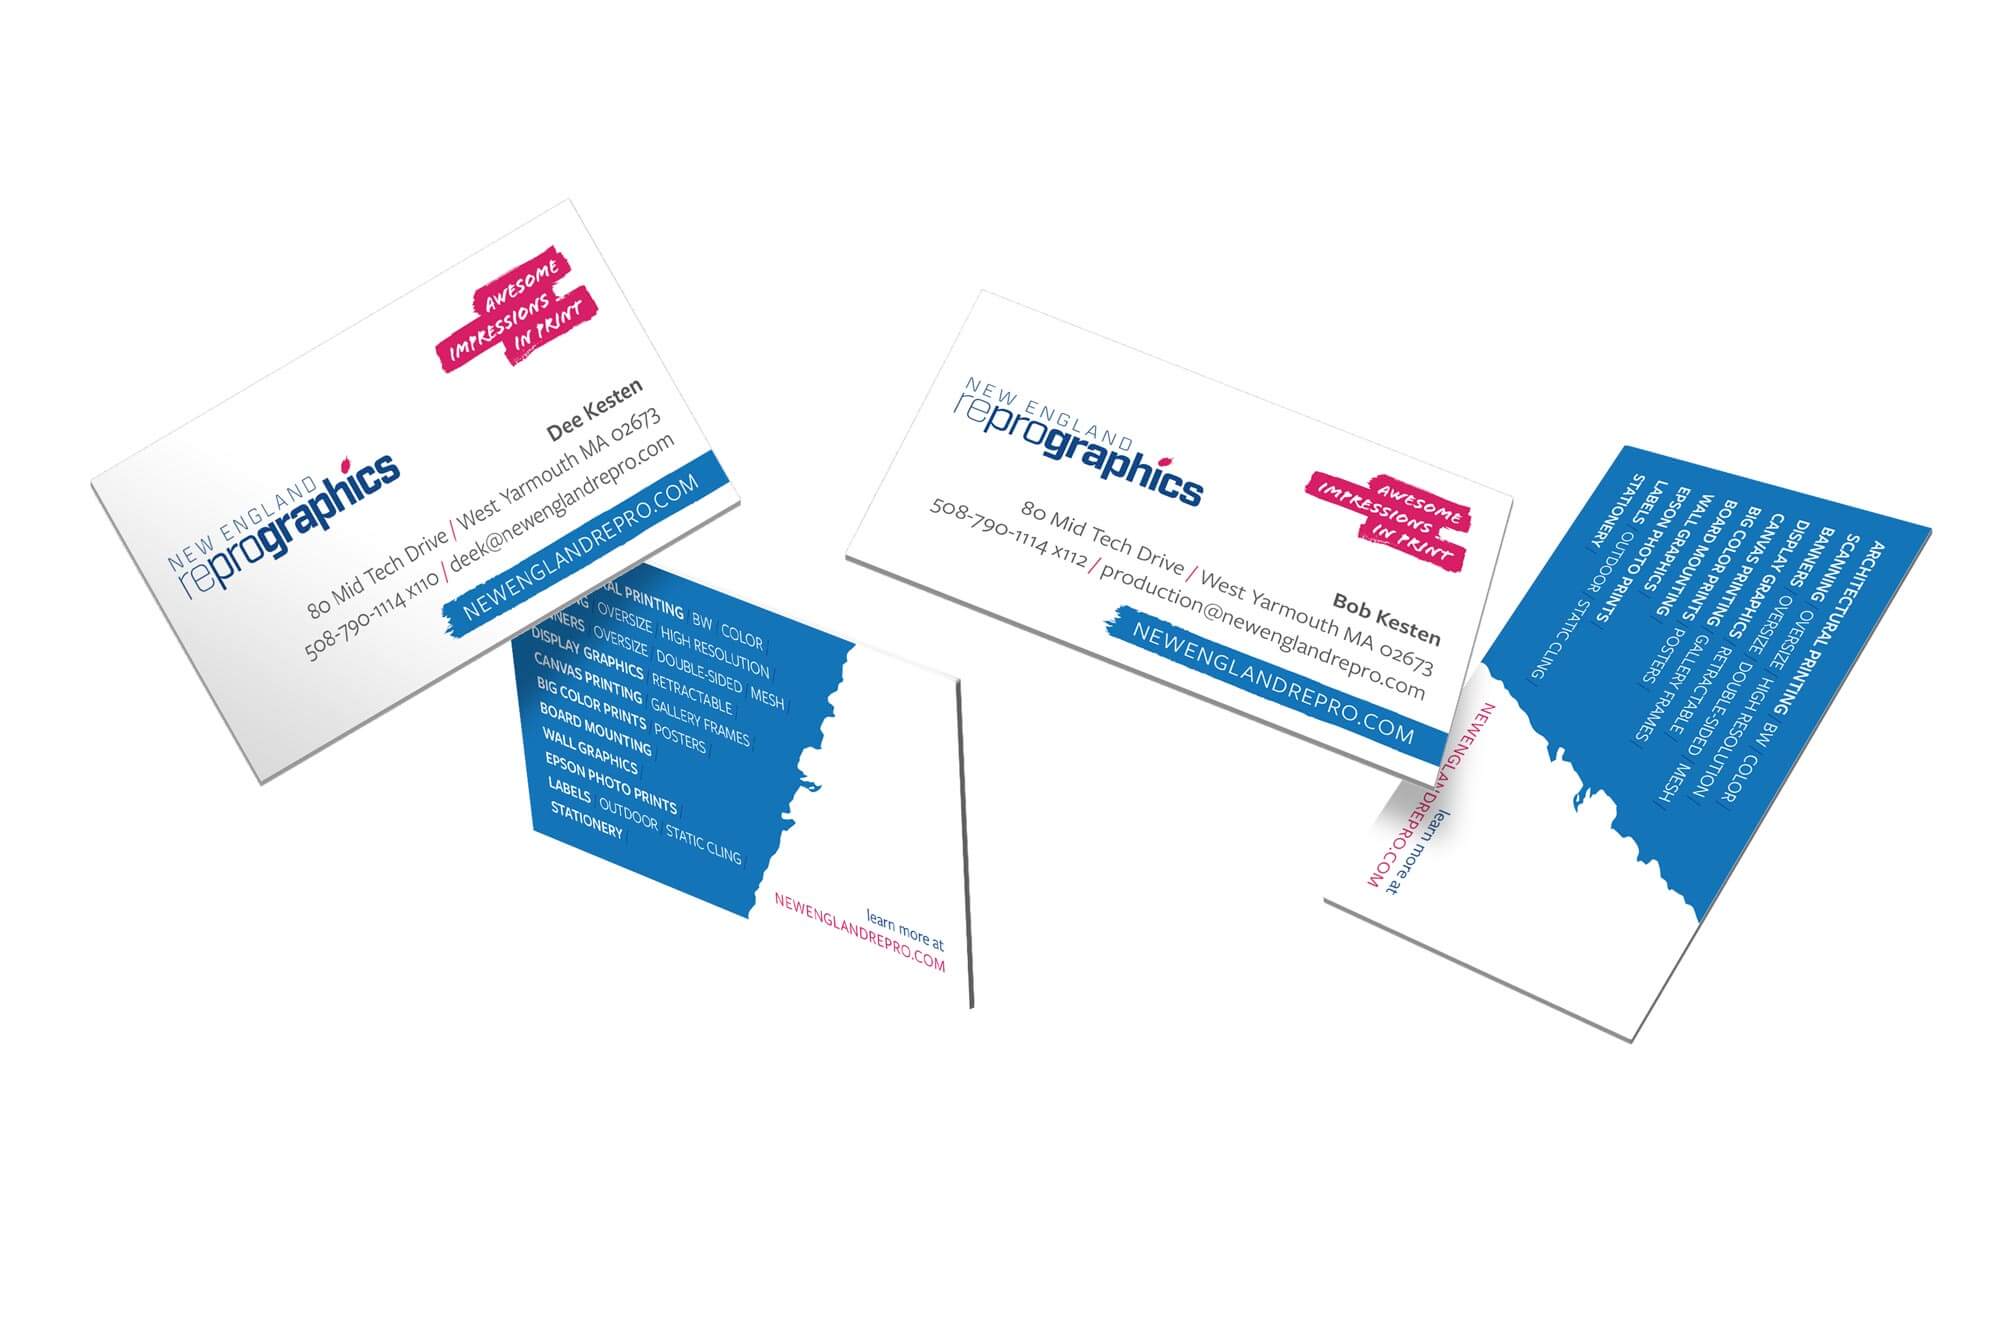 Business card mockup for New England Reprographics